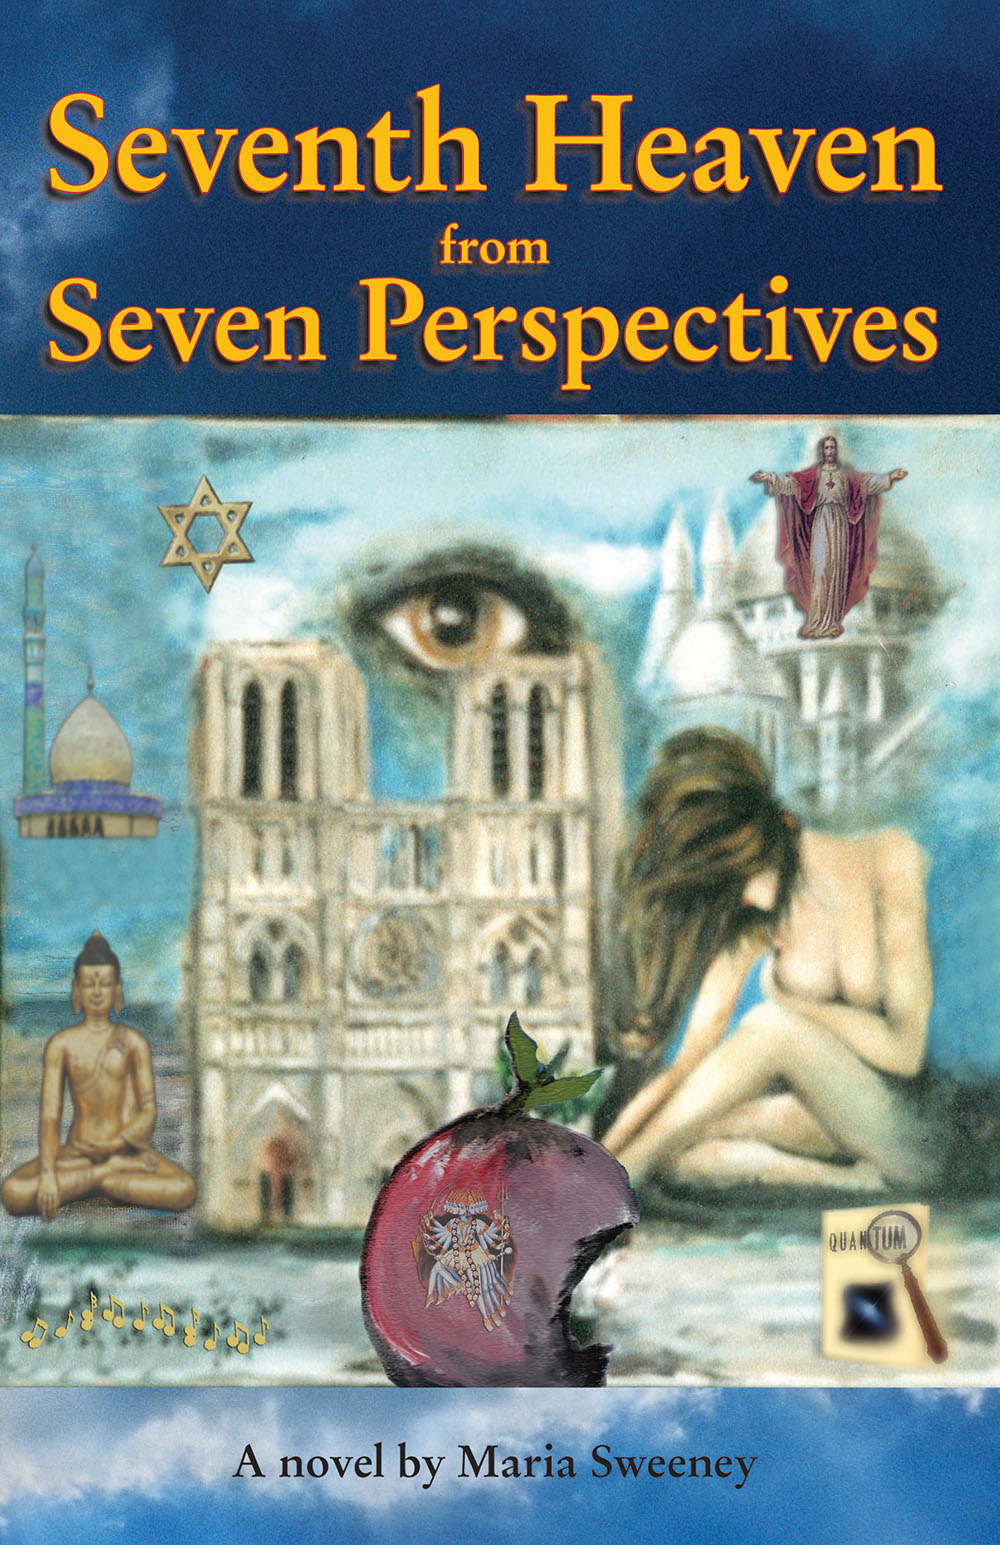 The front cover of Seventh Heaven, Seven Perceptions.